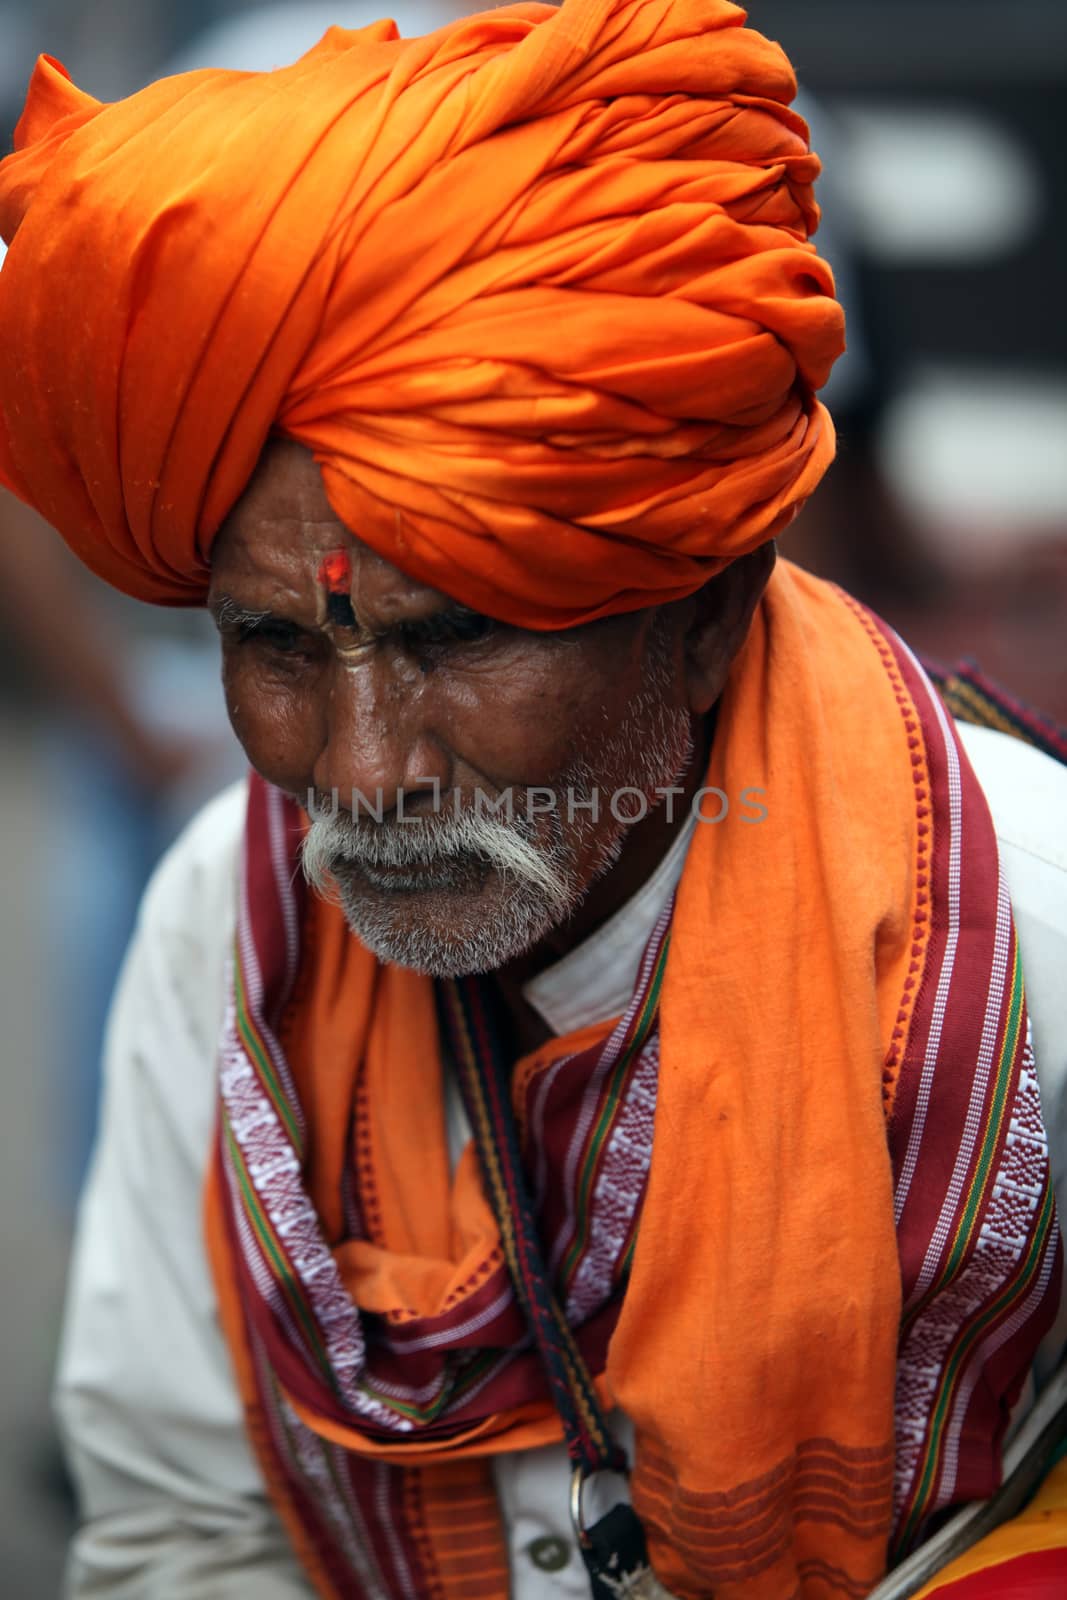 A very old pilgrim from India in his traditional attire of a saffron colored turban, the color generally represents Hinduism.